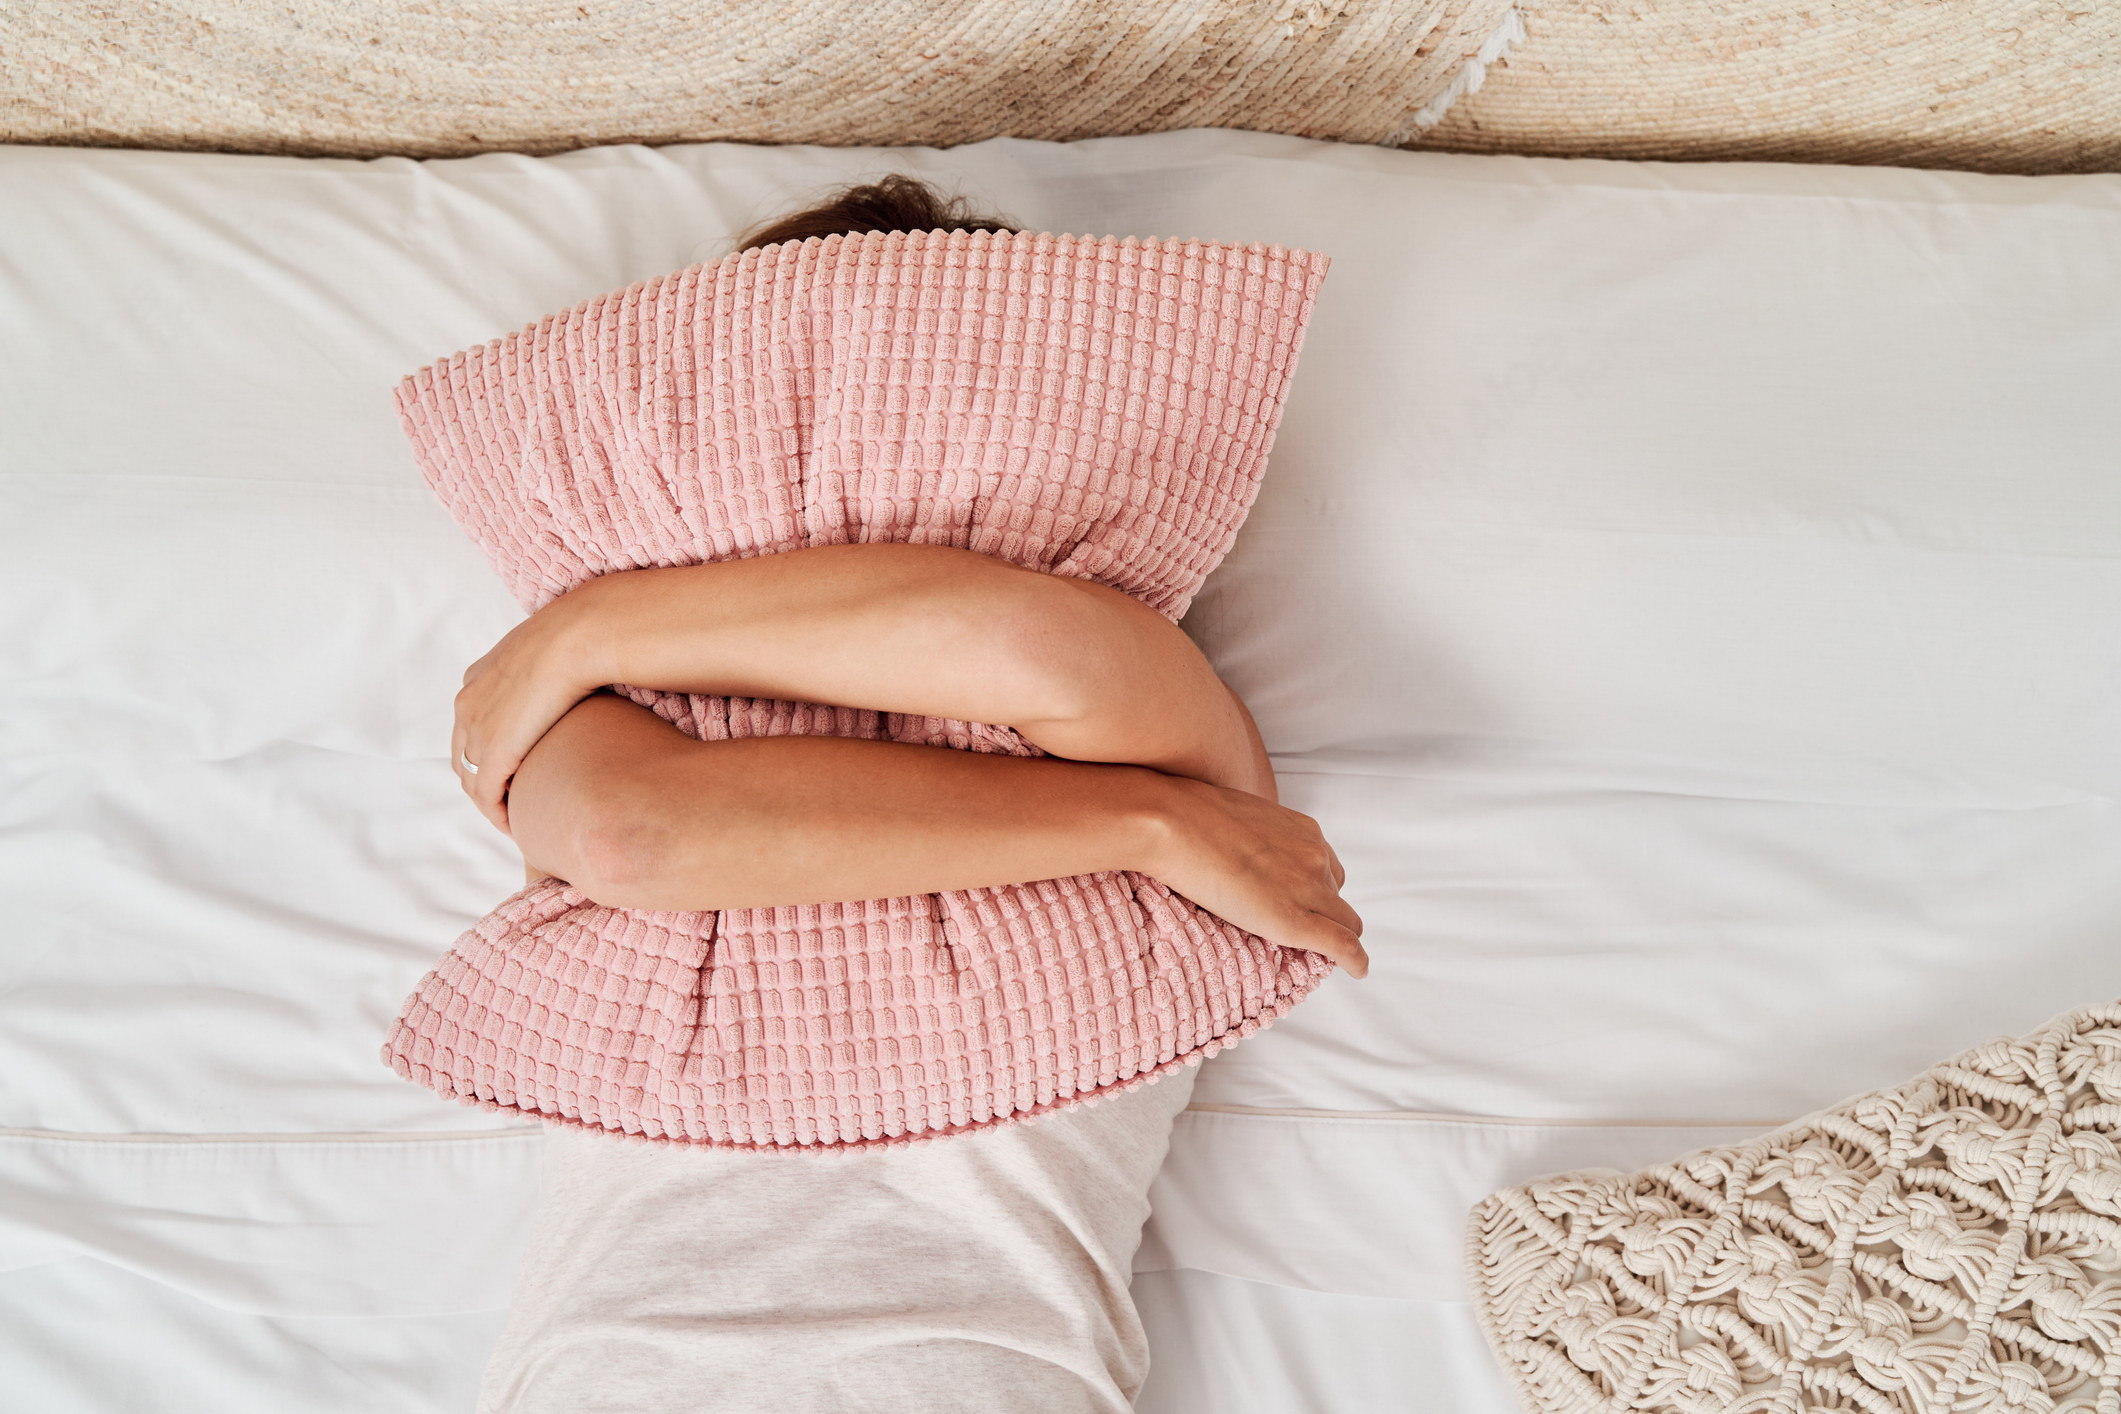 person hugging a pillow in bed